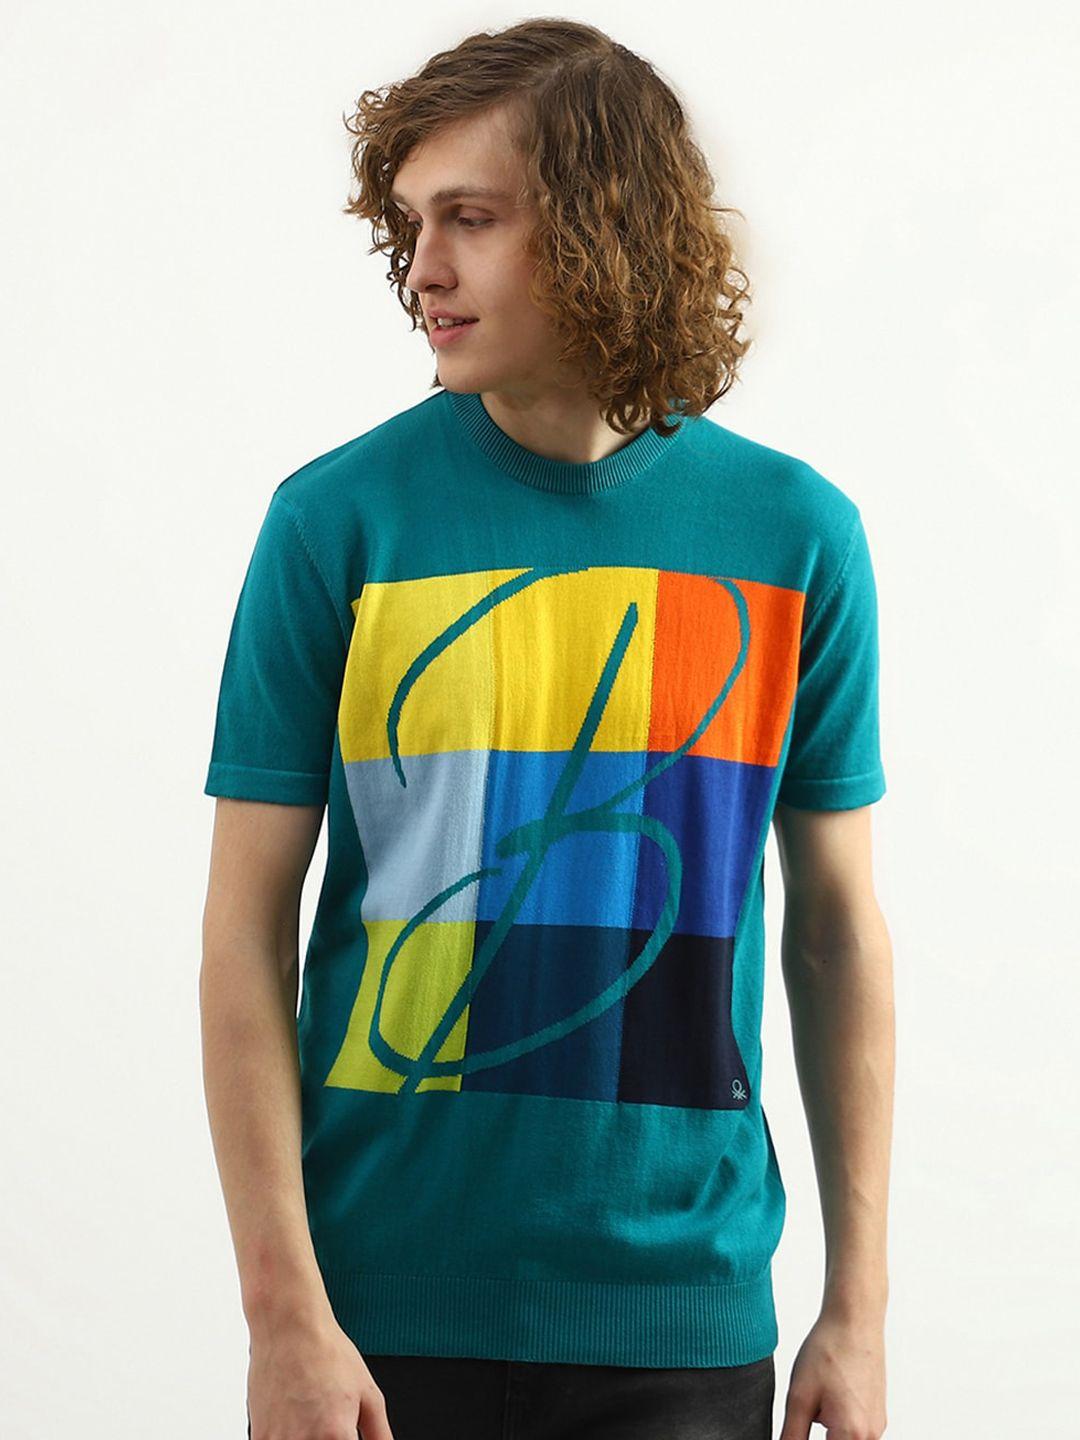 united-colors-of-benetton-men-printed-round-neck-cotton-t-shirt